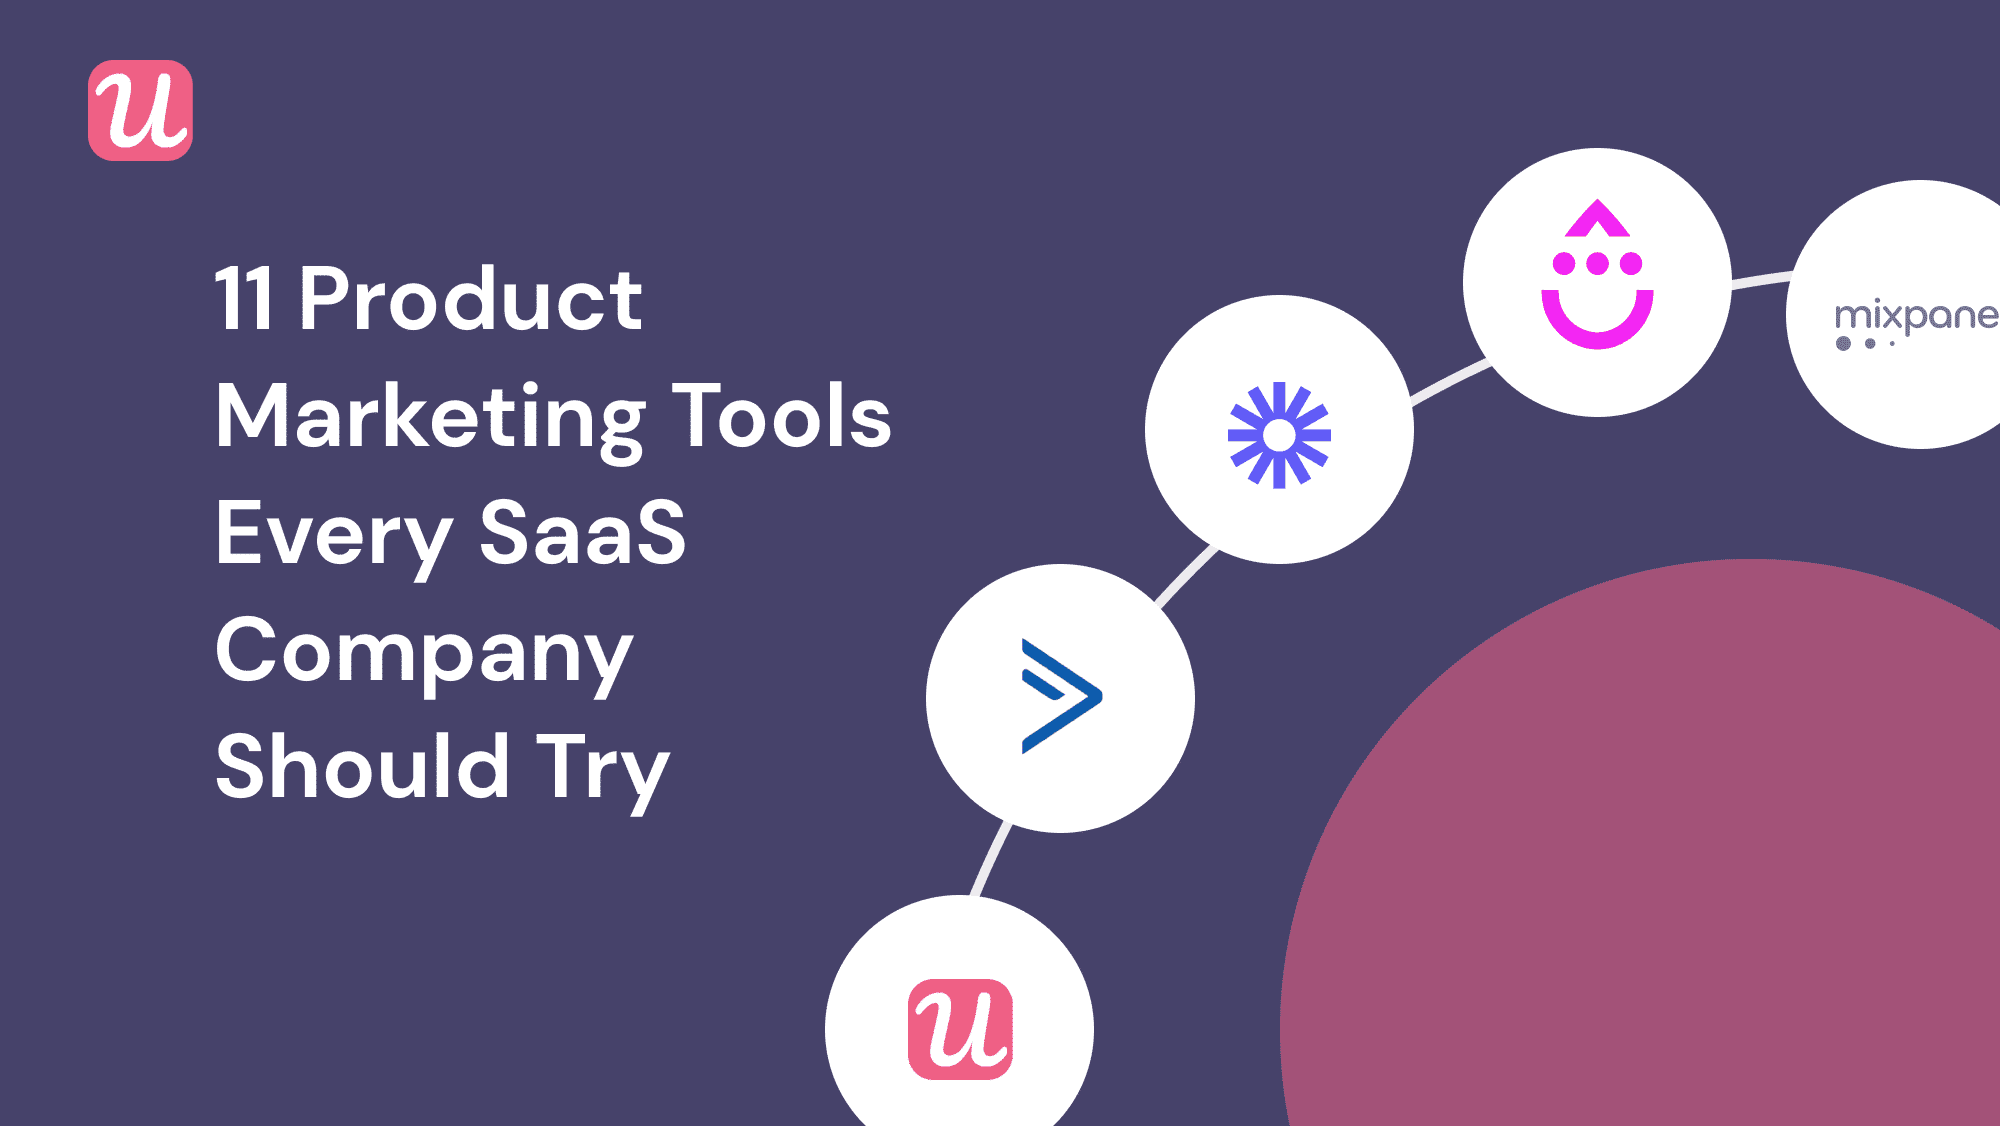 11 Product Marketing Tools Every SaaS Company Should Try